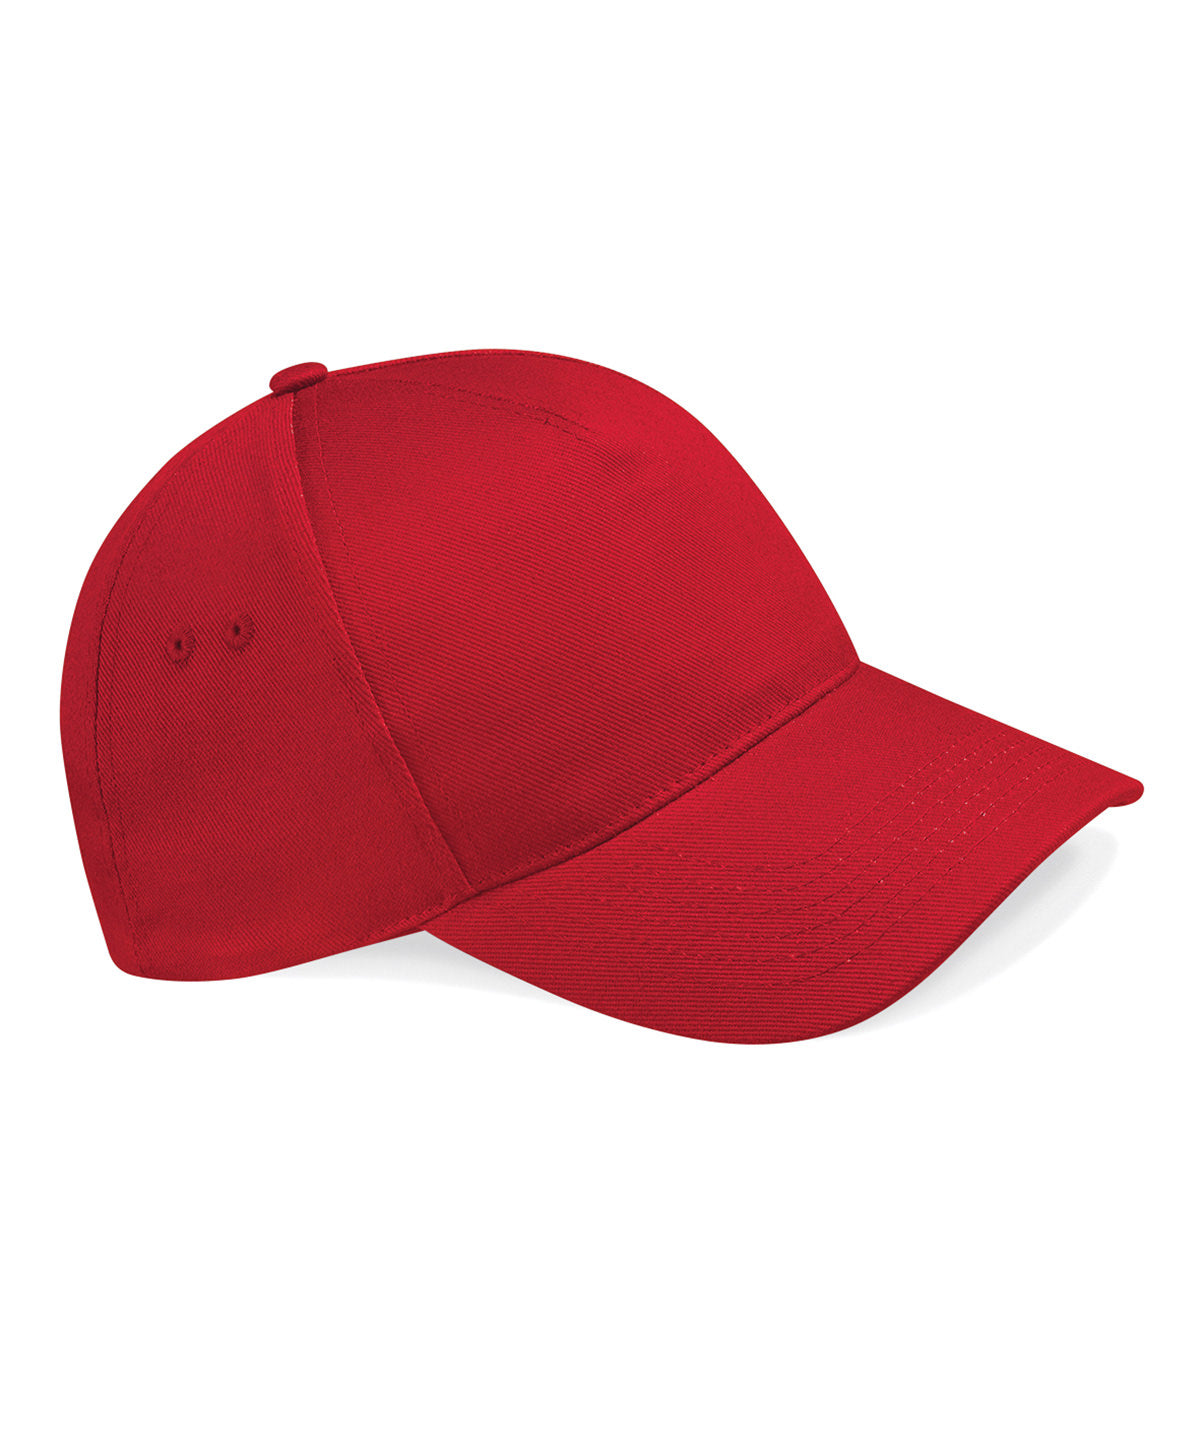 Personalised Caps - Mid Red Beechfield Ultimate 5-panel cap